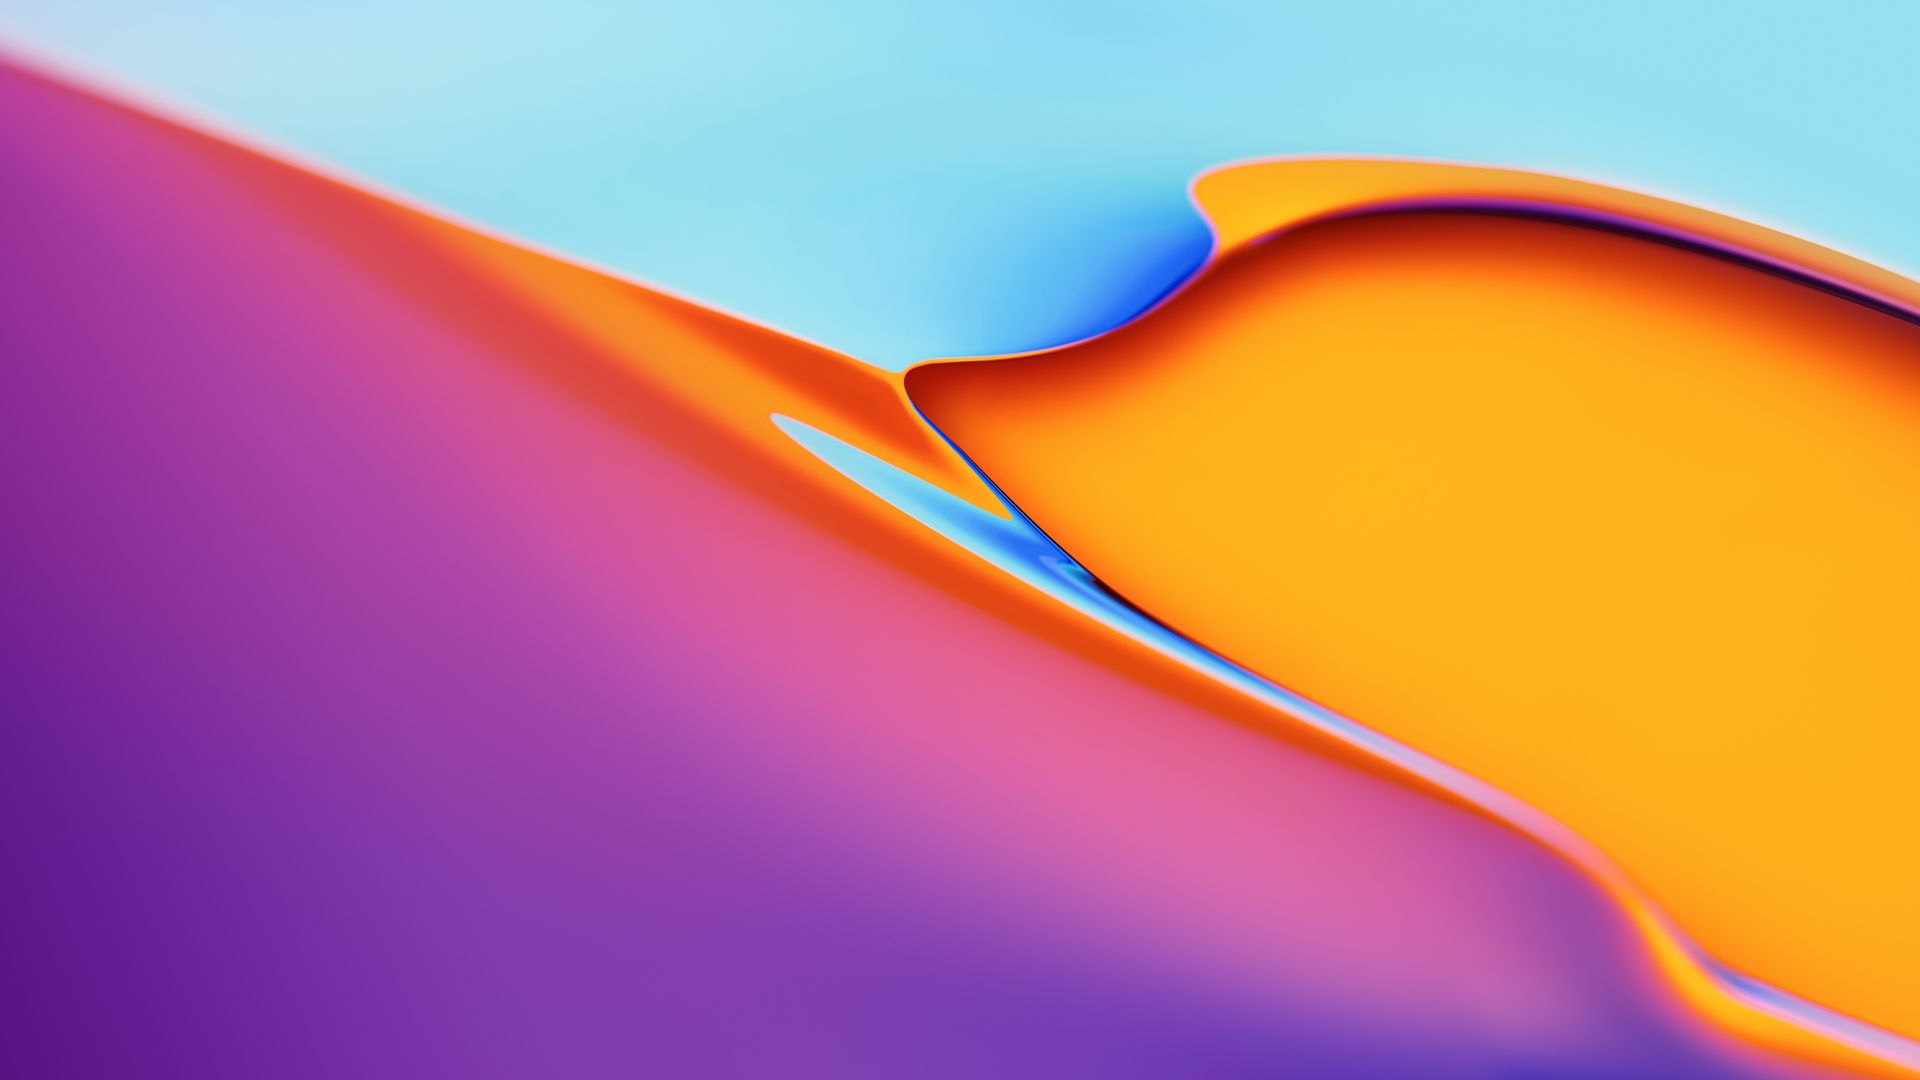 OnePlus TV, abstract, colorful, 4K (horizontal)